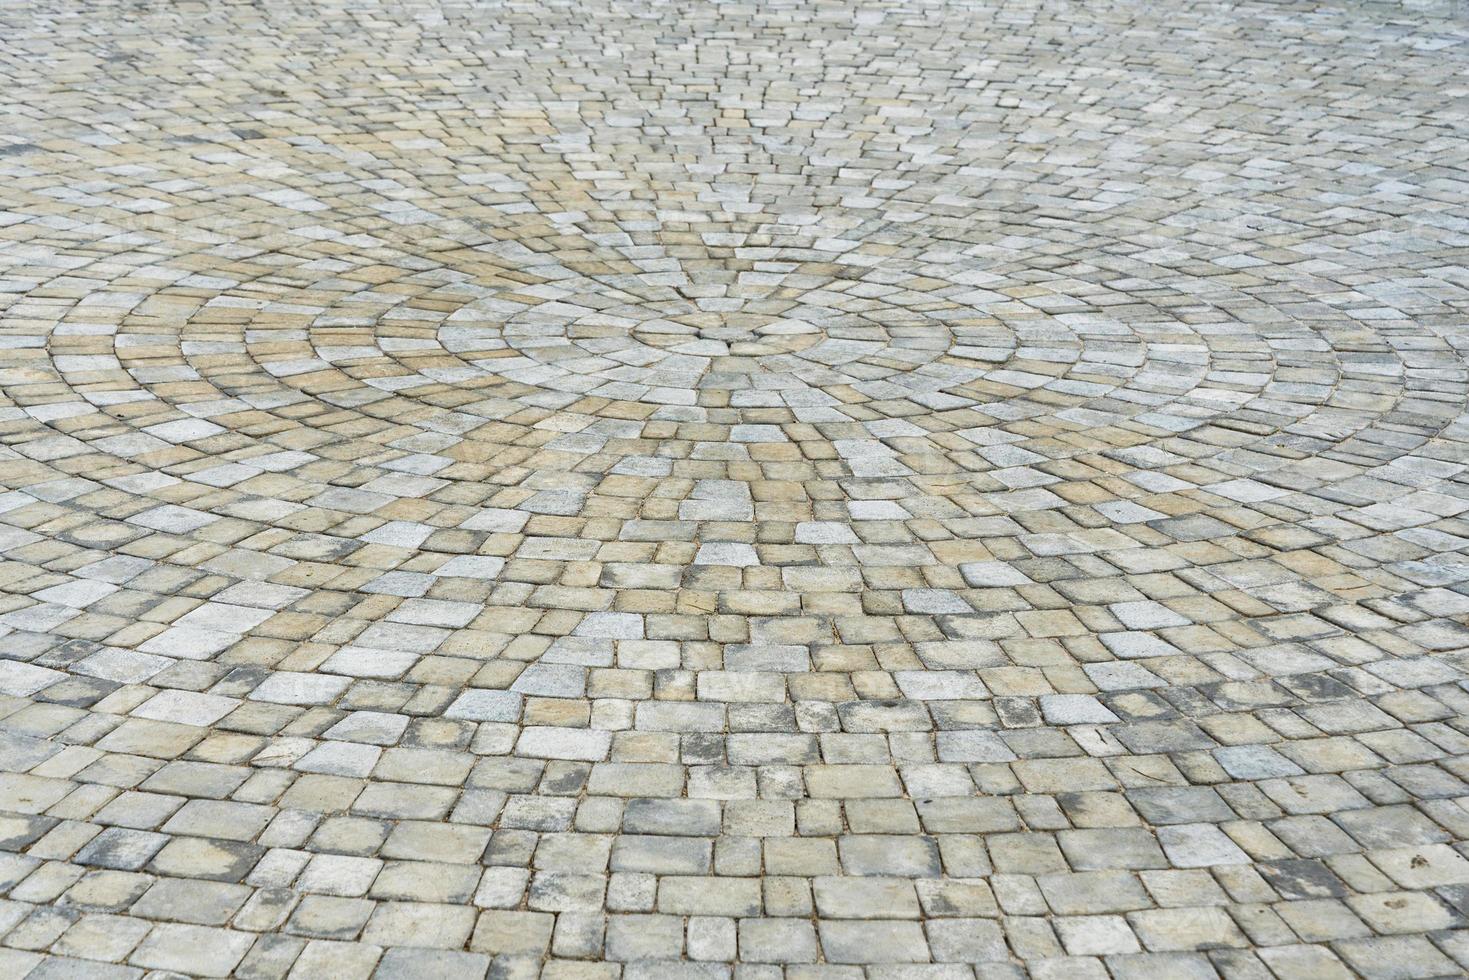 Stone paving circle texture. Abstract structured background of modern street pavement slabs pattern photo